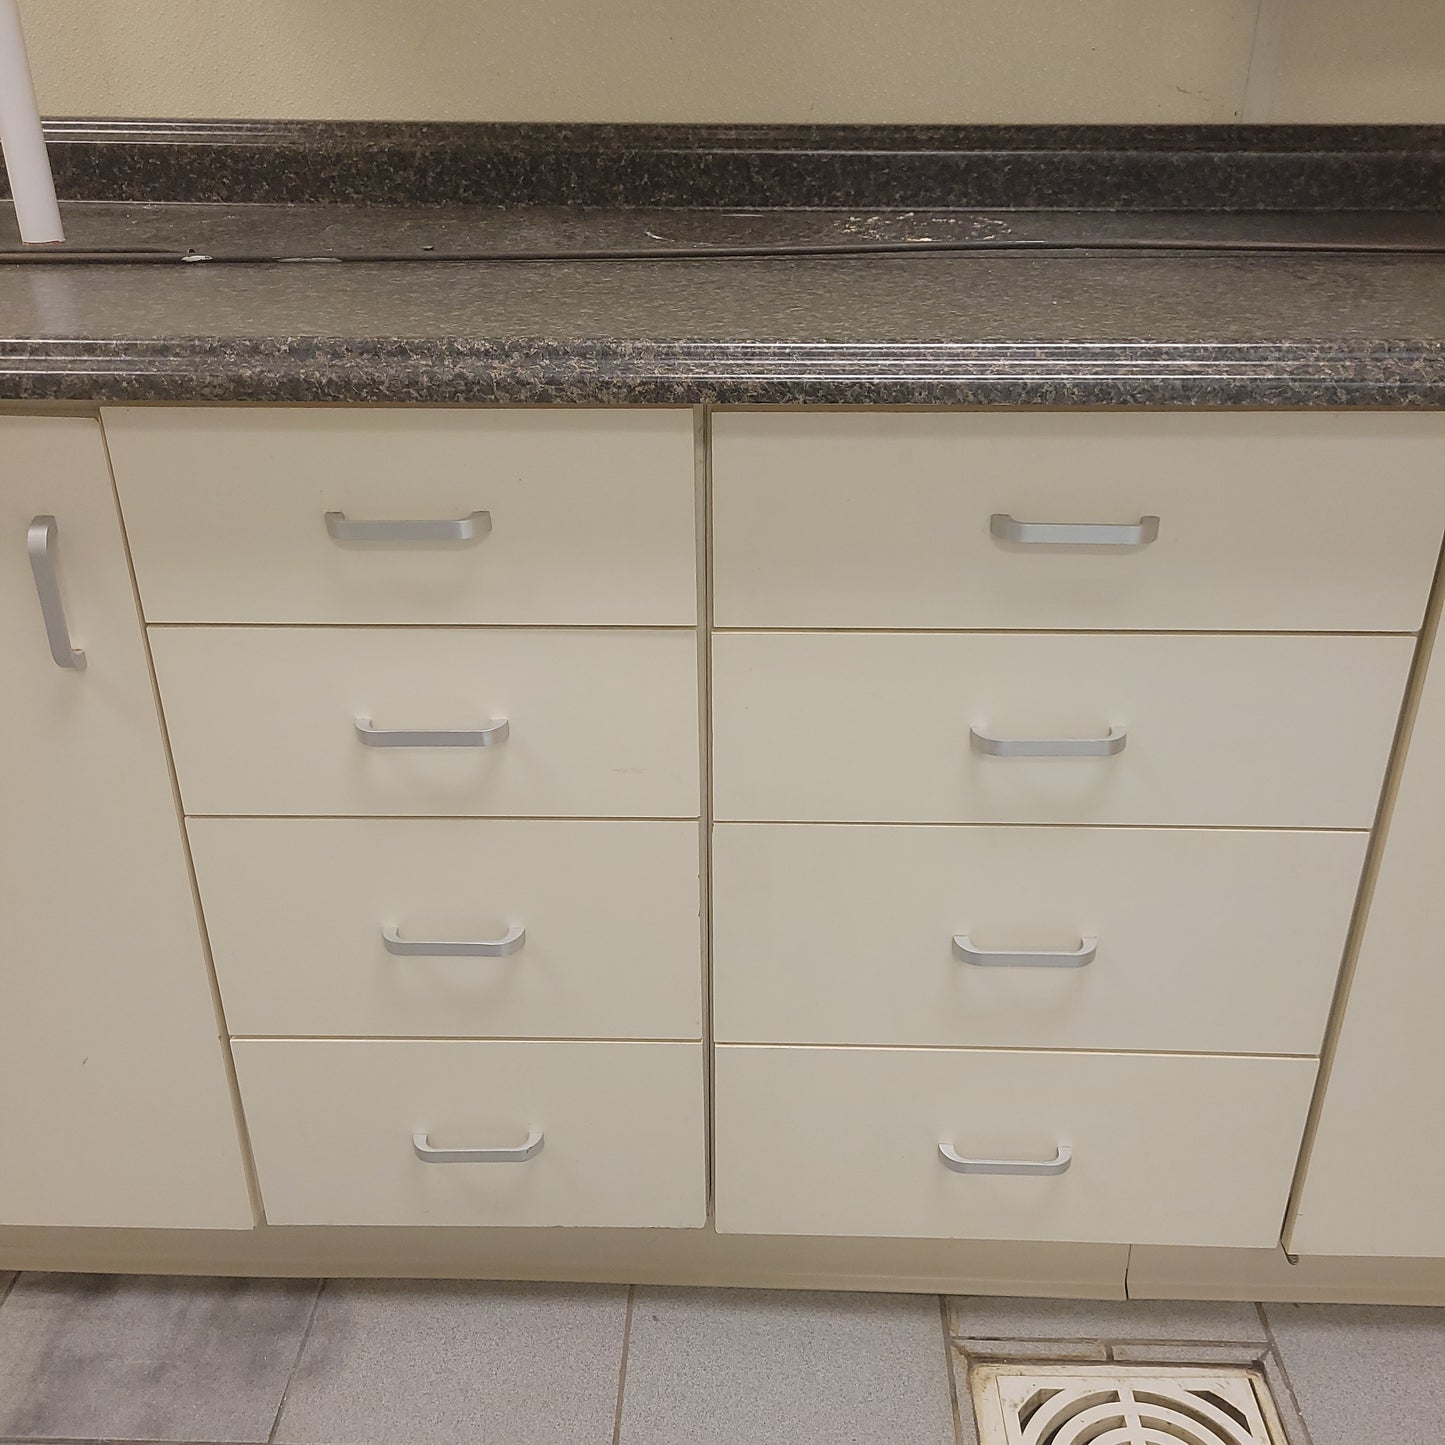 Upper and lower cabinets with countertop